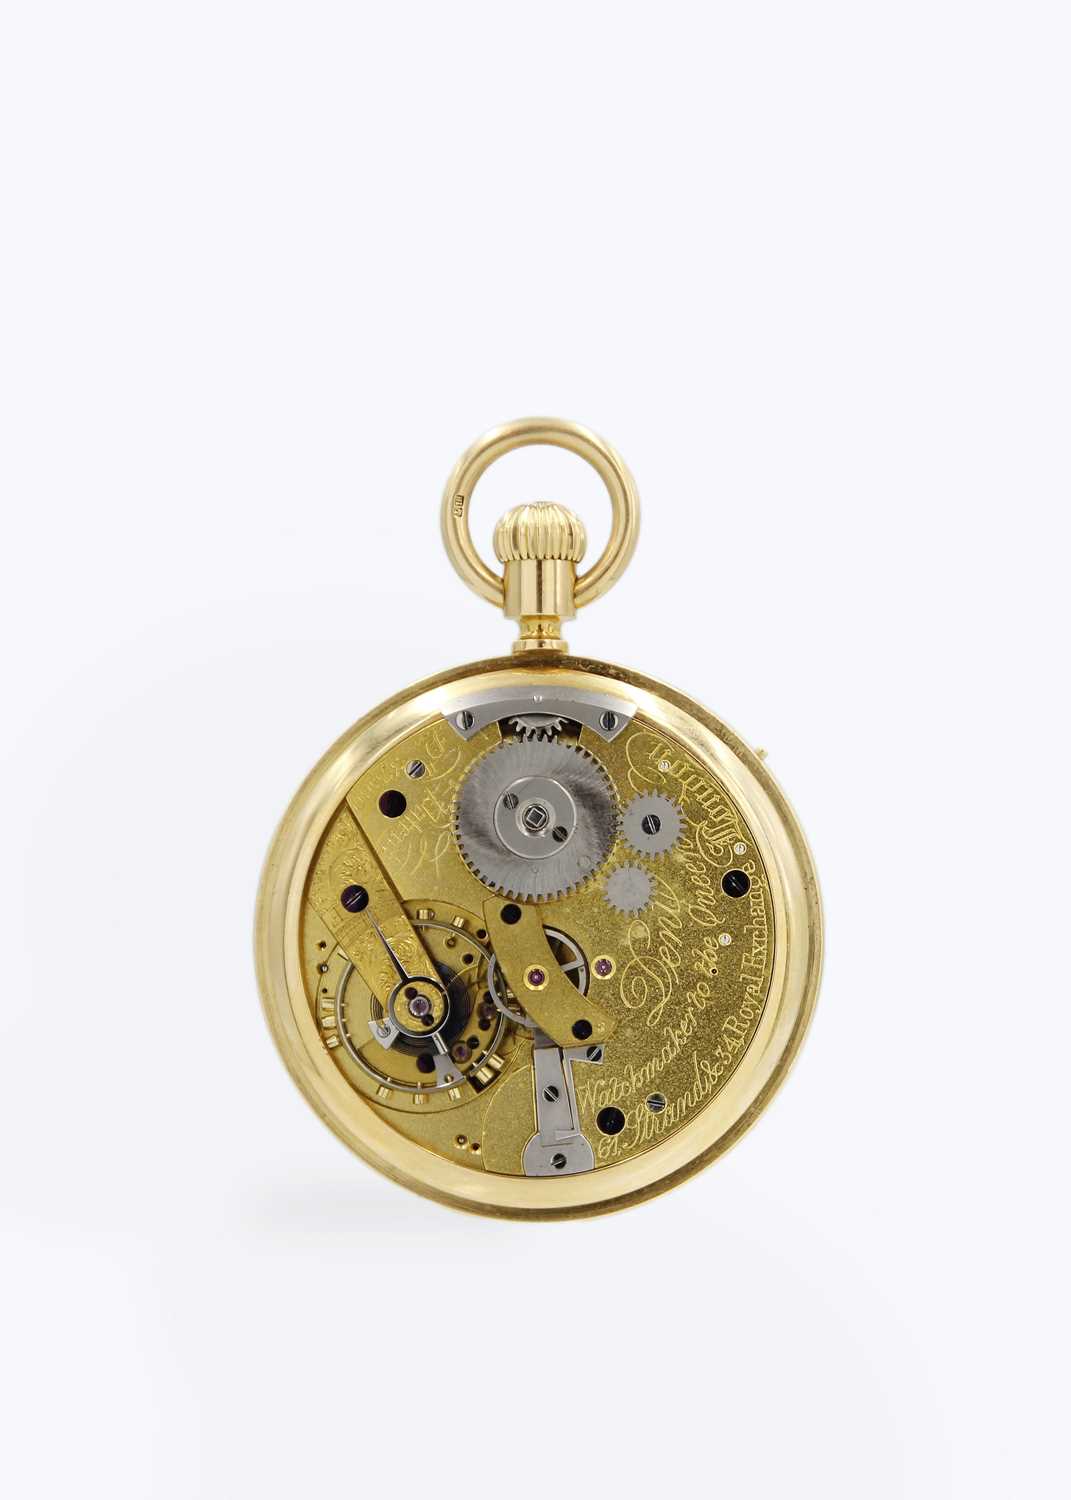 DENT - An unusual 18ct cased chronograph crown wind open face pocket watch, no. 37660. - Image 3 of 12